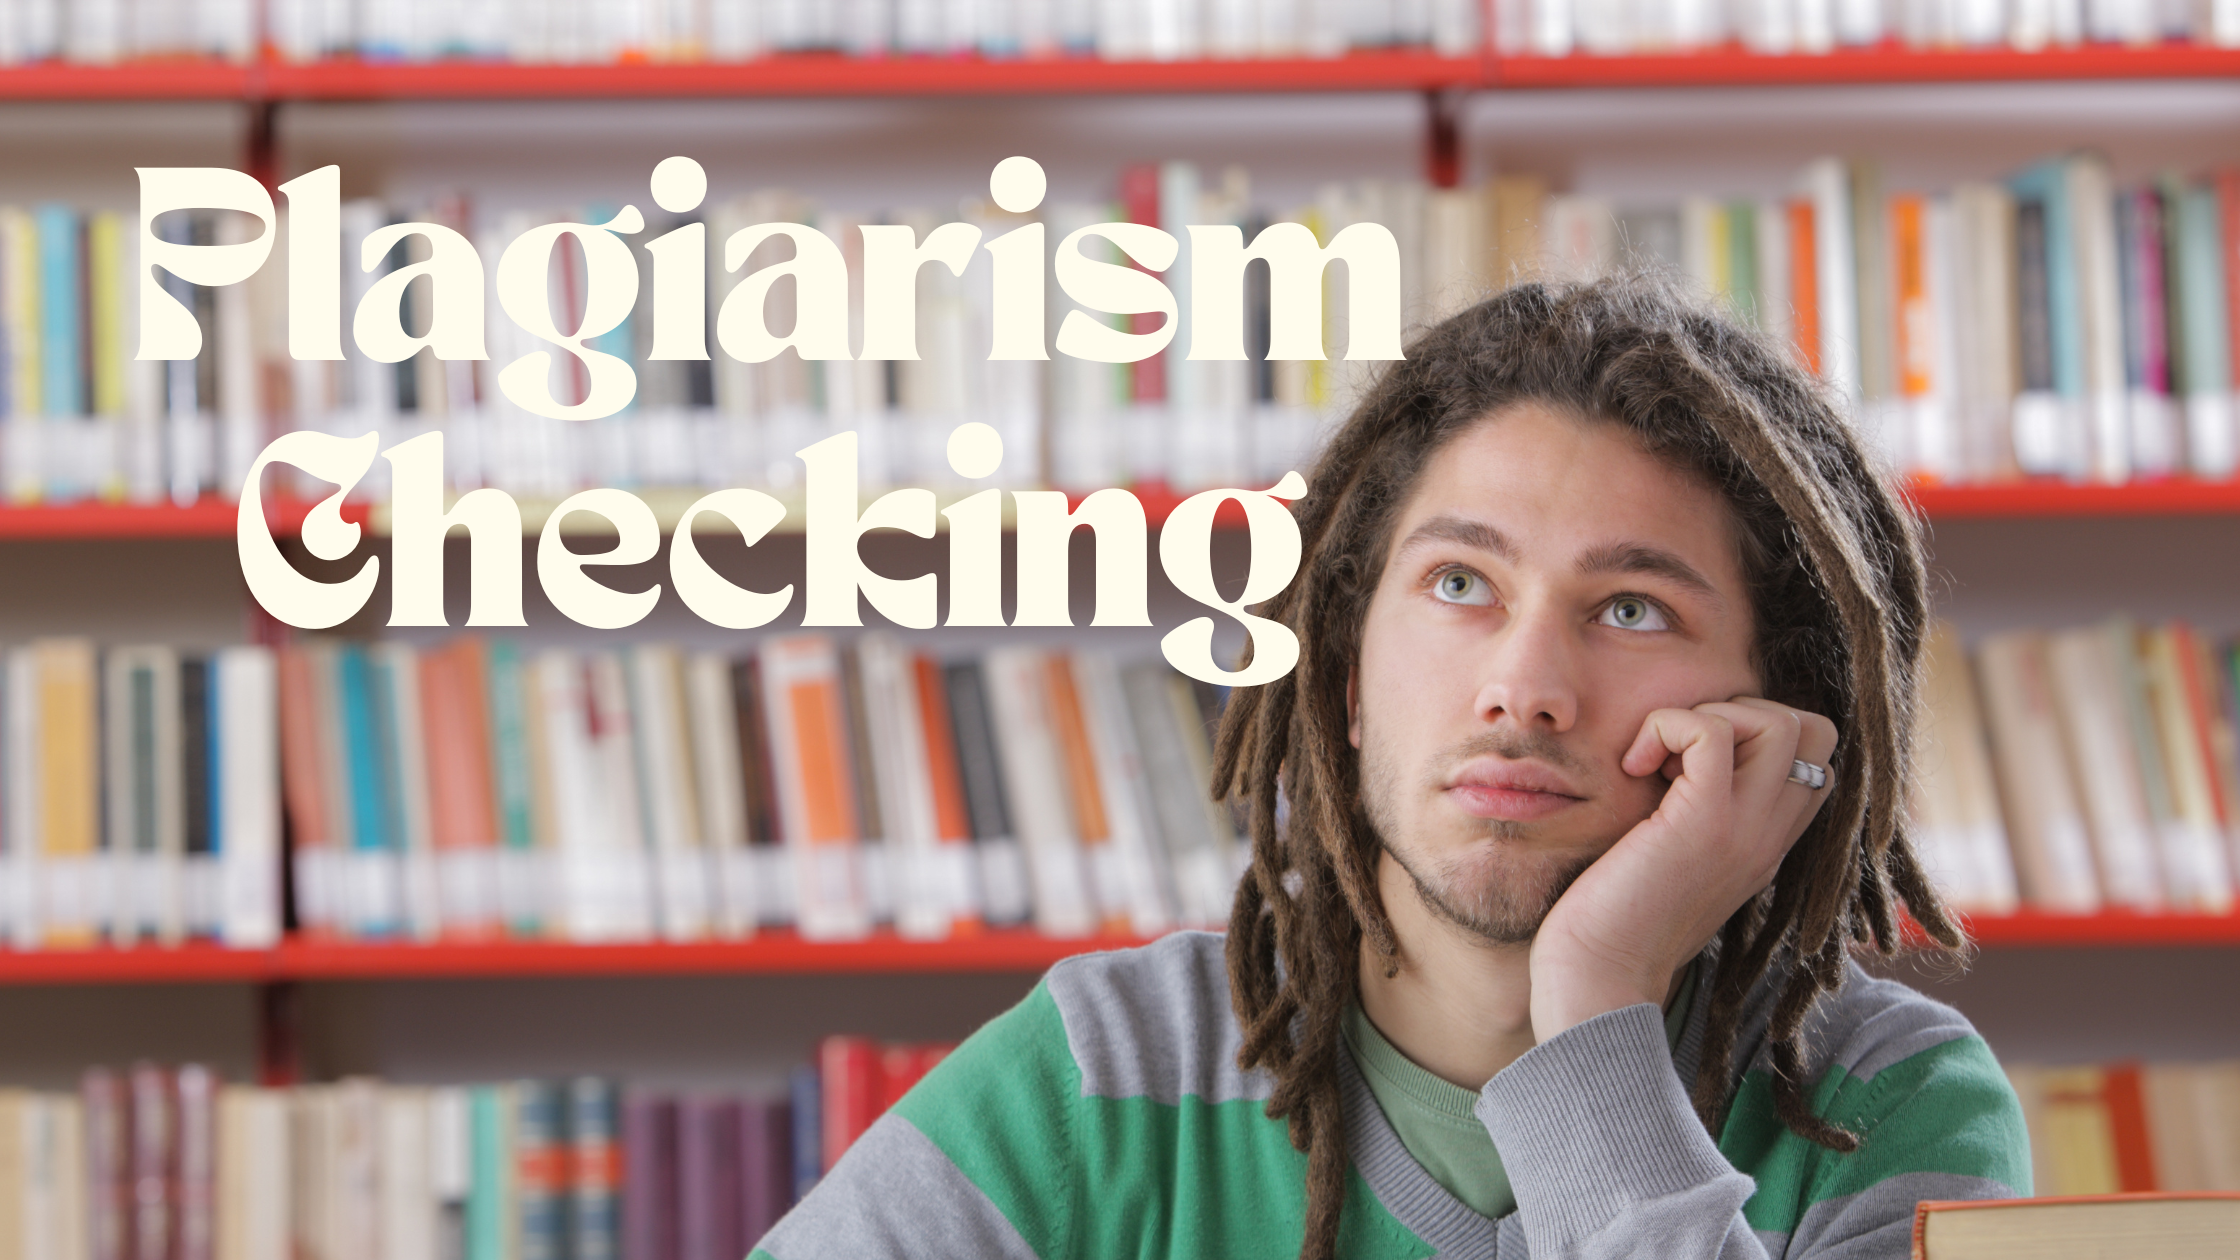 A male student with dreadlocks ponders the nuances of plagiarism checking